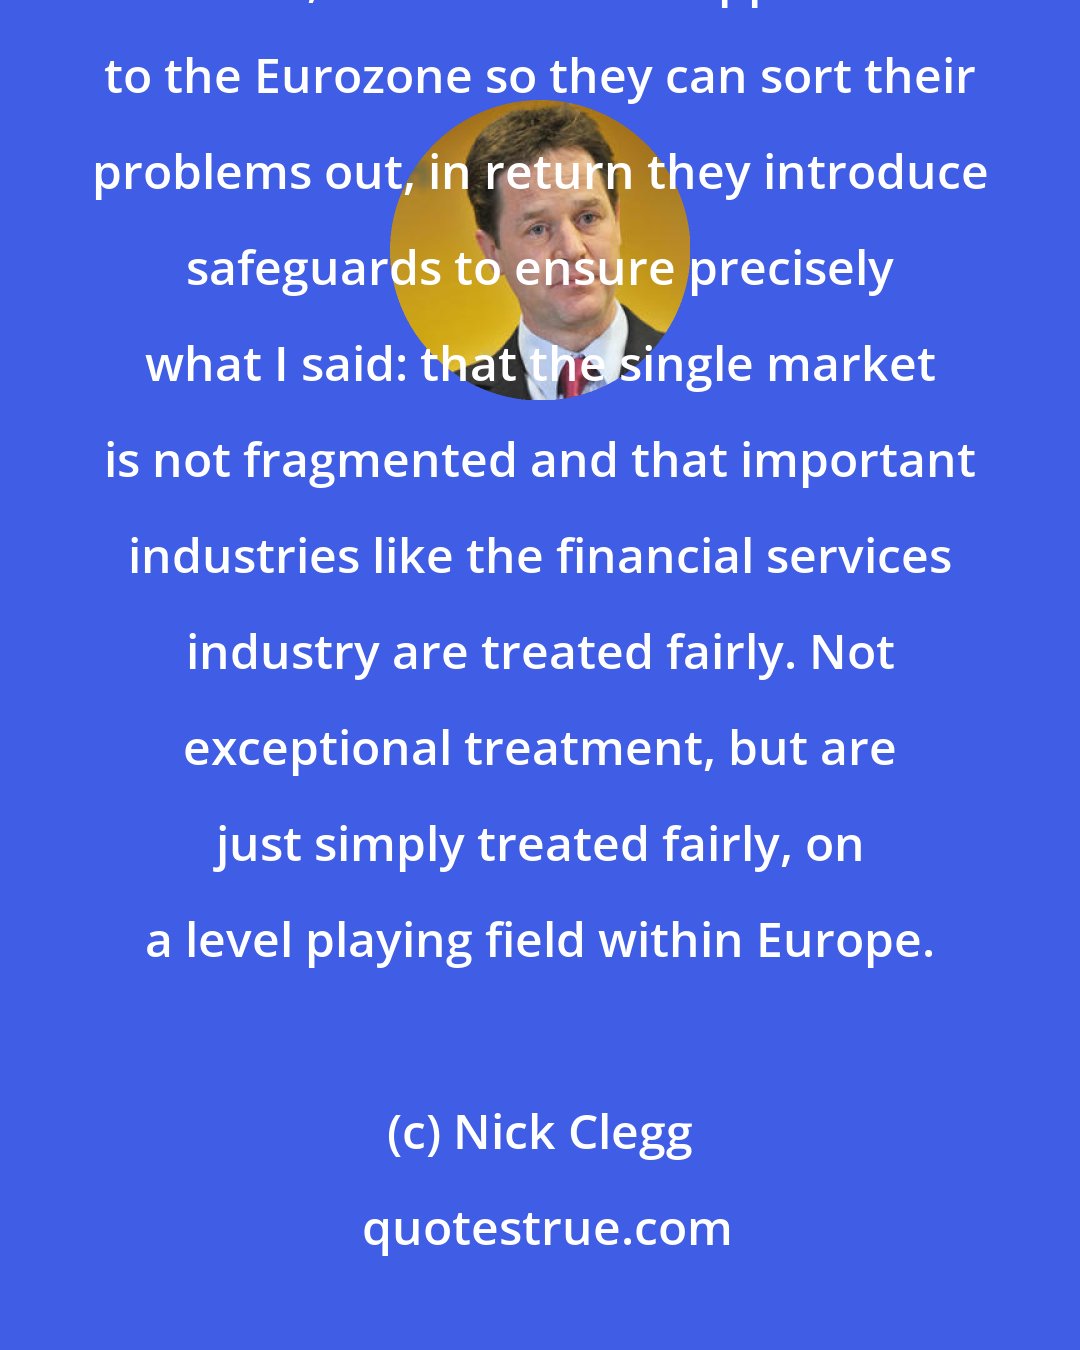 Nick Clegg: I work in lockstep, hand in glove, with the prime minister on these issues, and as we are supportive to the Eurozone so they can sort their problems out, in return they introduce safeguards to ensure precisely what I said: that the single market is not fragmented and that important industries like the financial services industry are treated fairly. Not exceptional treatment, but are just simply treated fairly, on a level playing field within Europe.